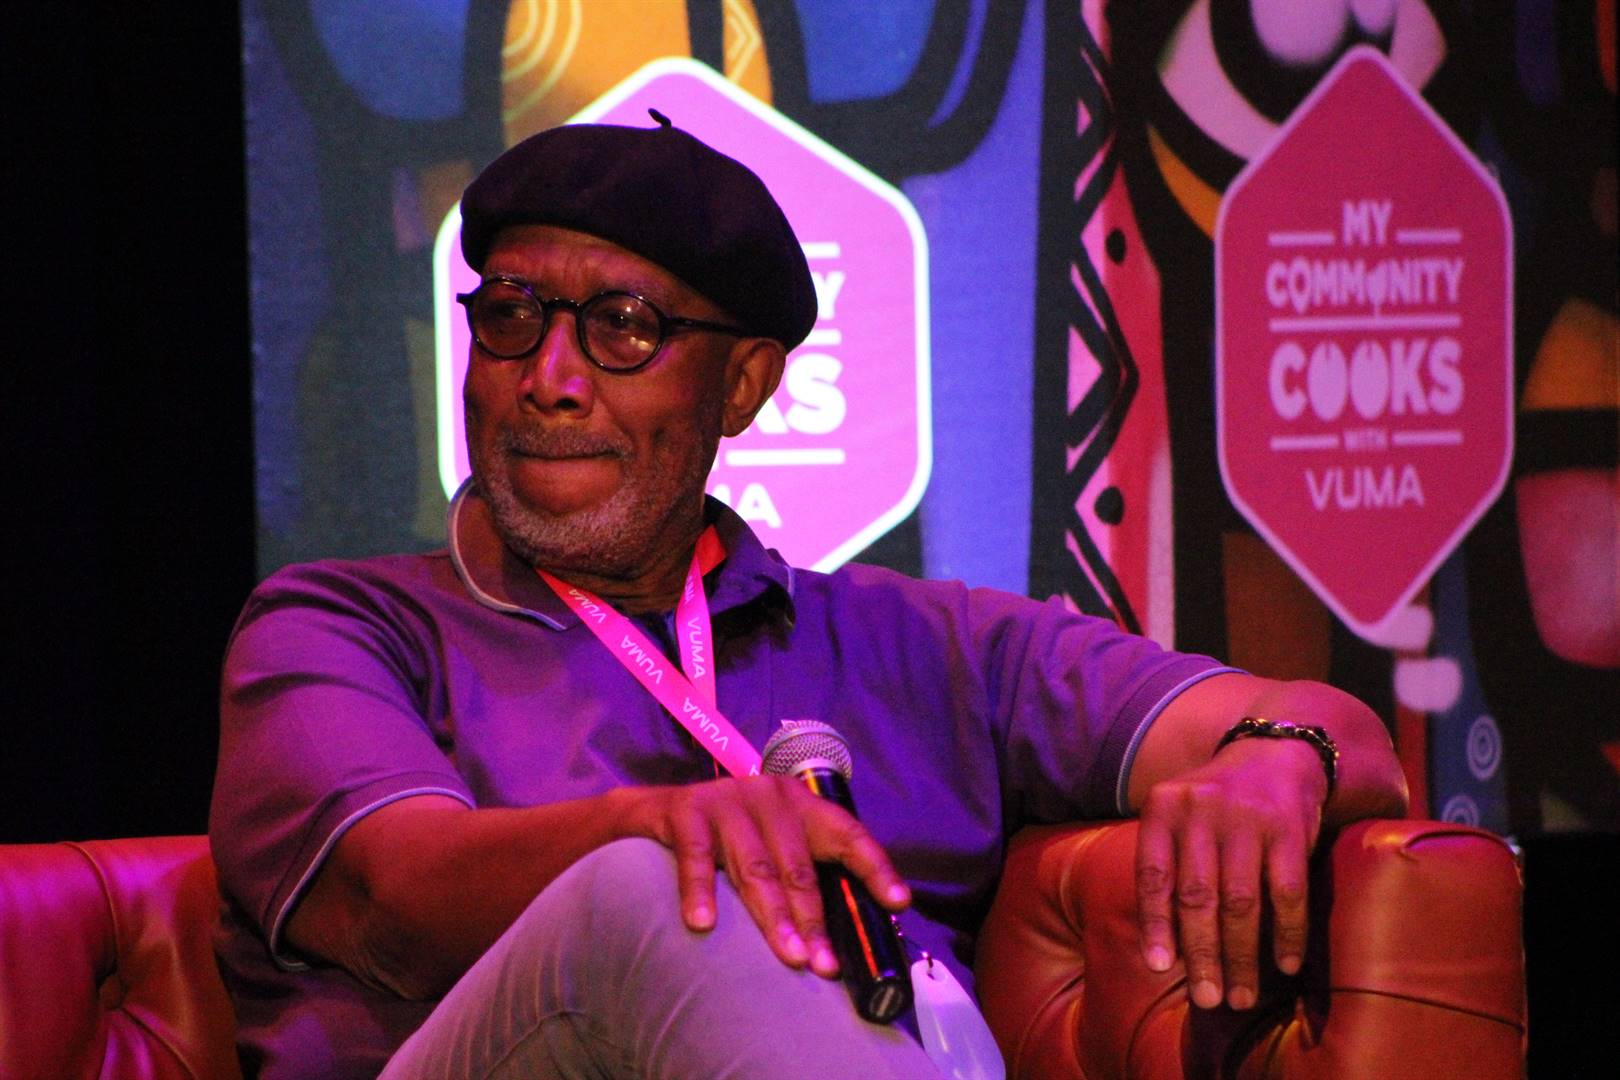 Attendees were given the opportunity to hear Sipho ‘Hotstix’ Mabuse sing some of his greatest hits, at Vuma’s My Community Cooks event at the Soweto Theatre. Photo: City Press